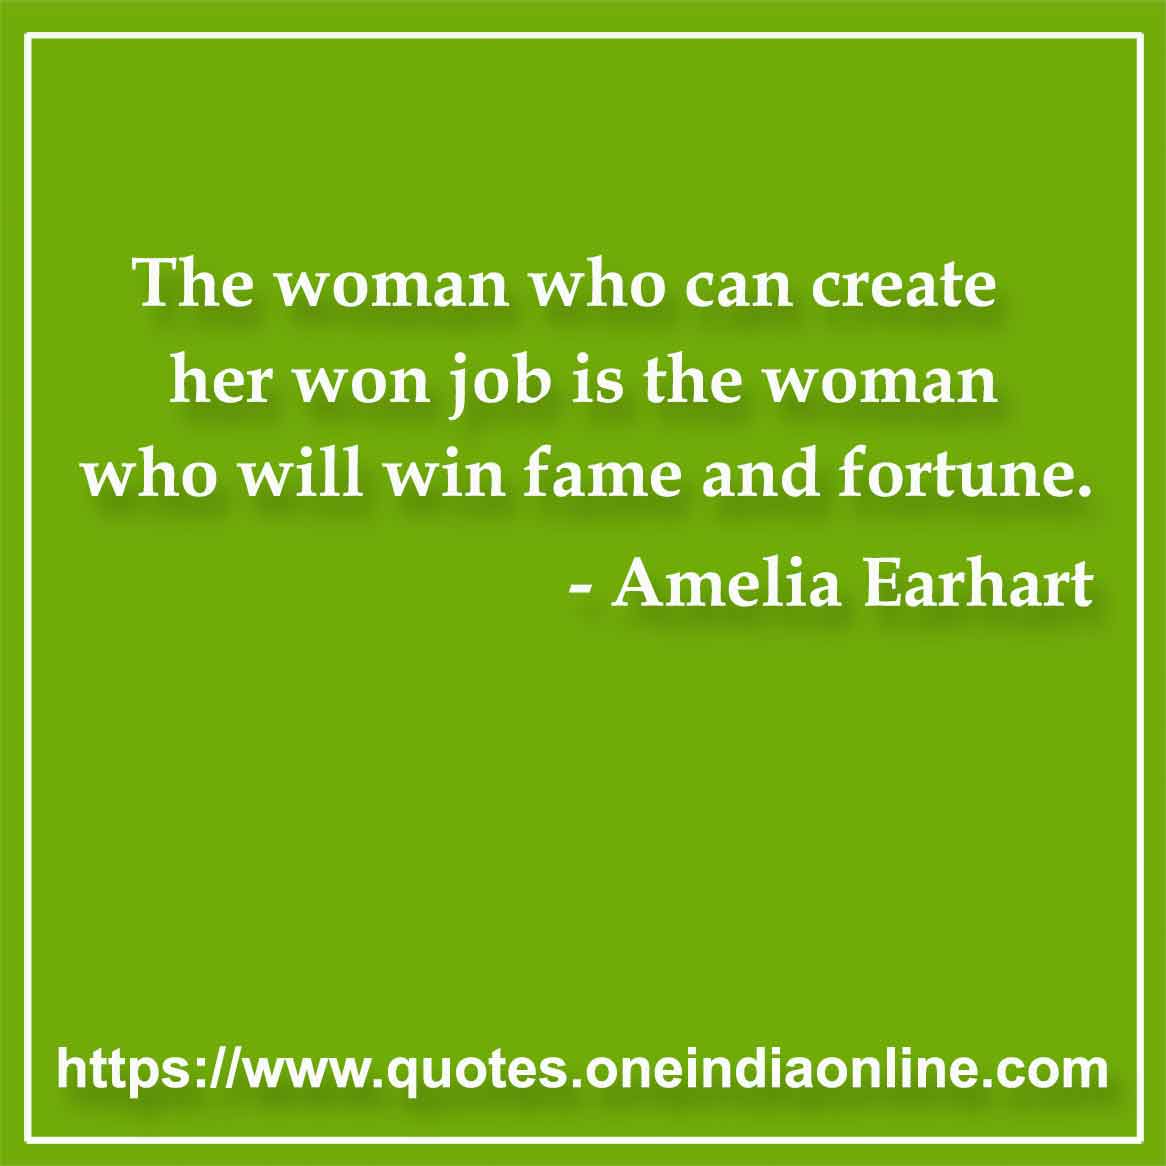 The woman who can create her won job is the woman who will win fame and fortune.

-  by Amelia Earhart 